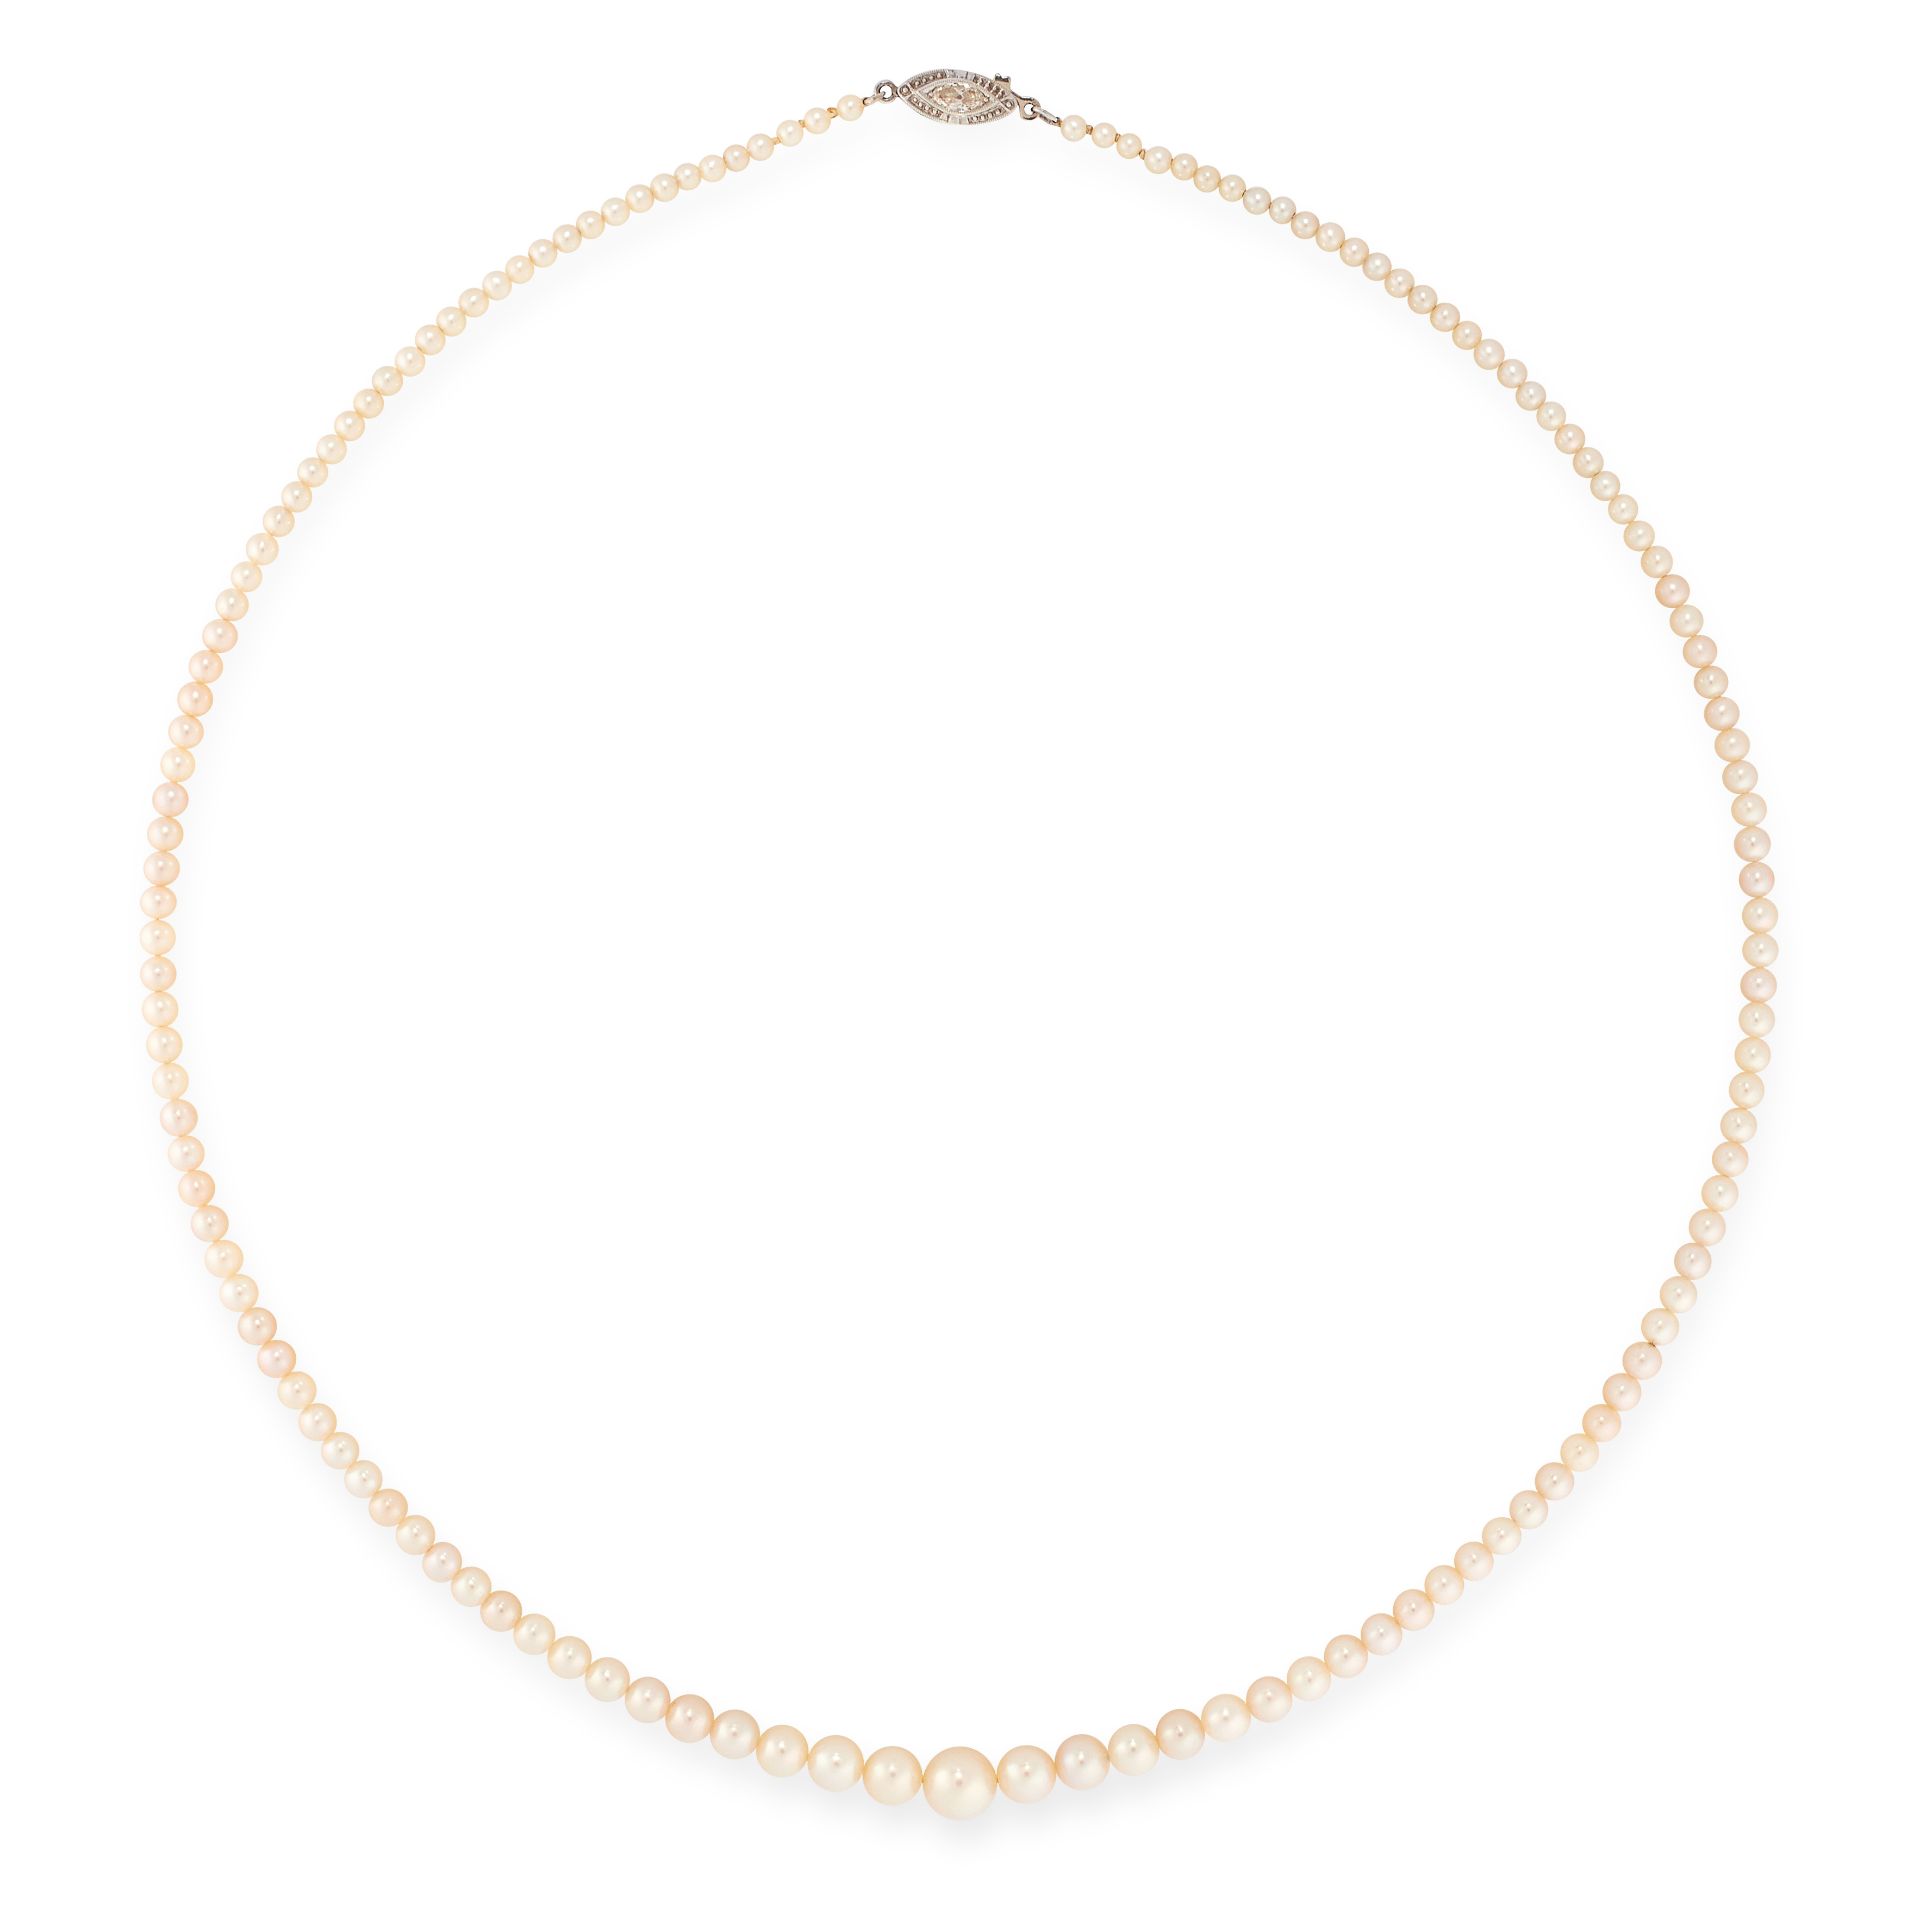 A PEARL AND DIAMOND NECKLACE comprising of a single row of pearls ranging from 6.3mm-2.2mm in